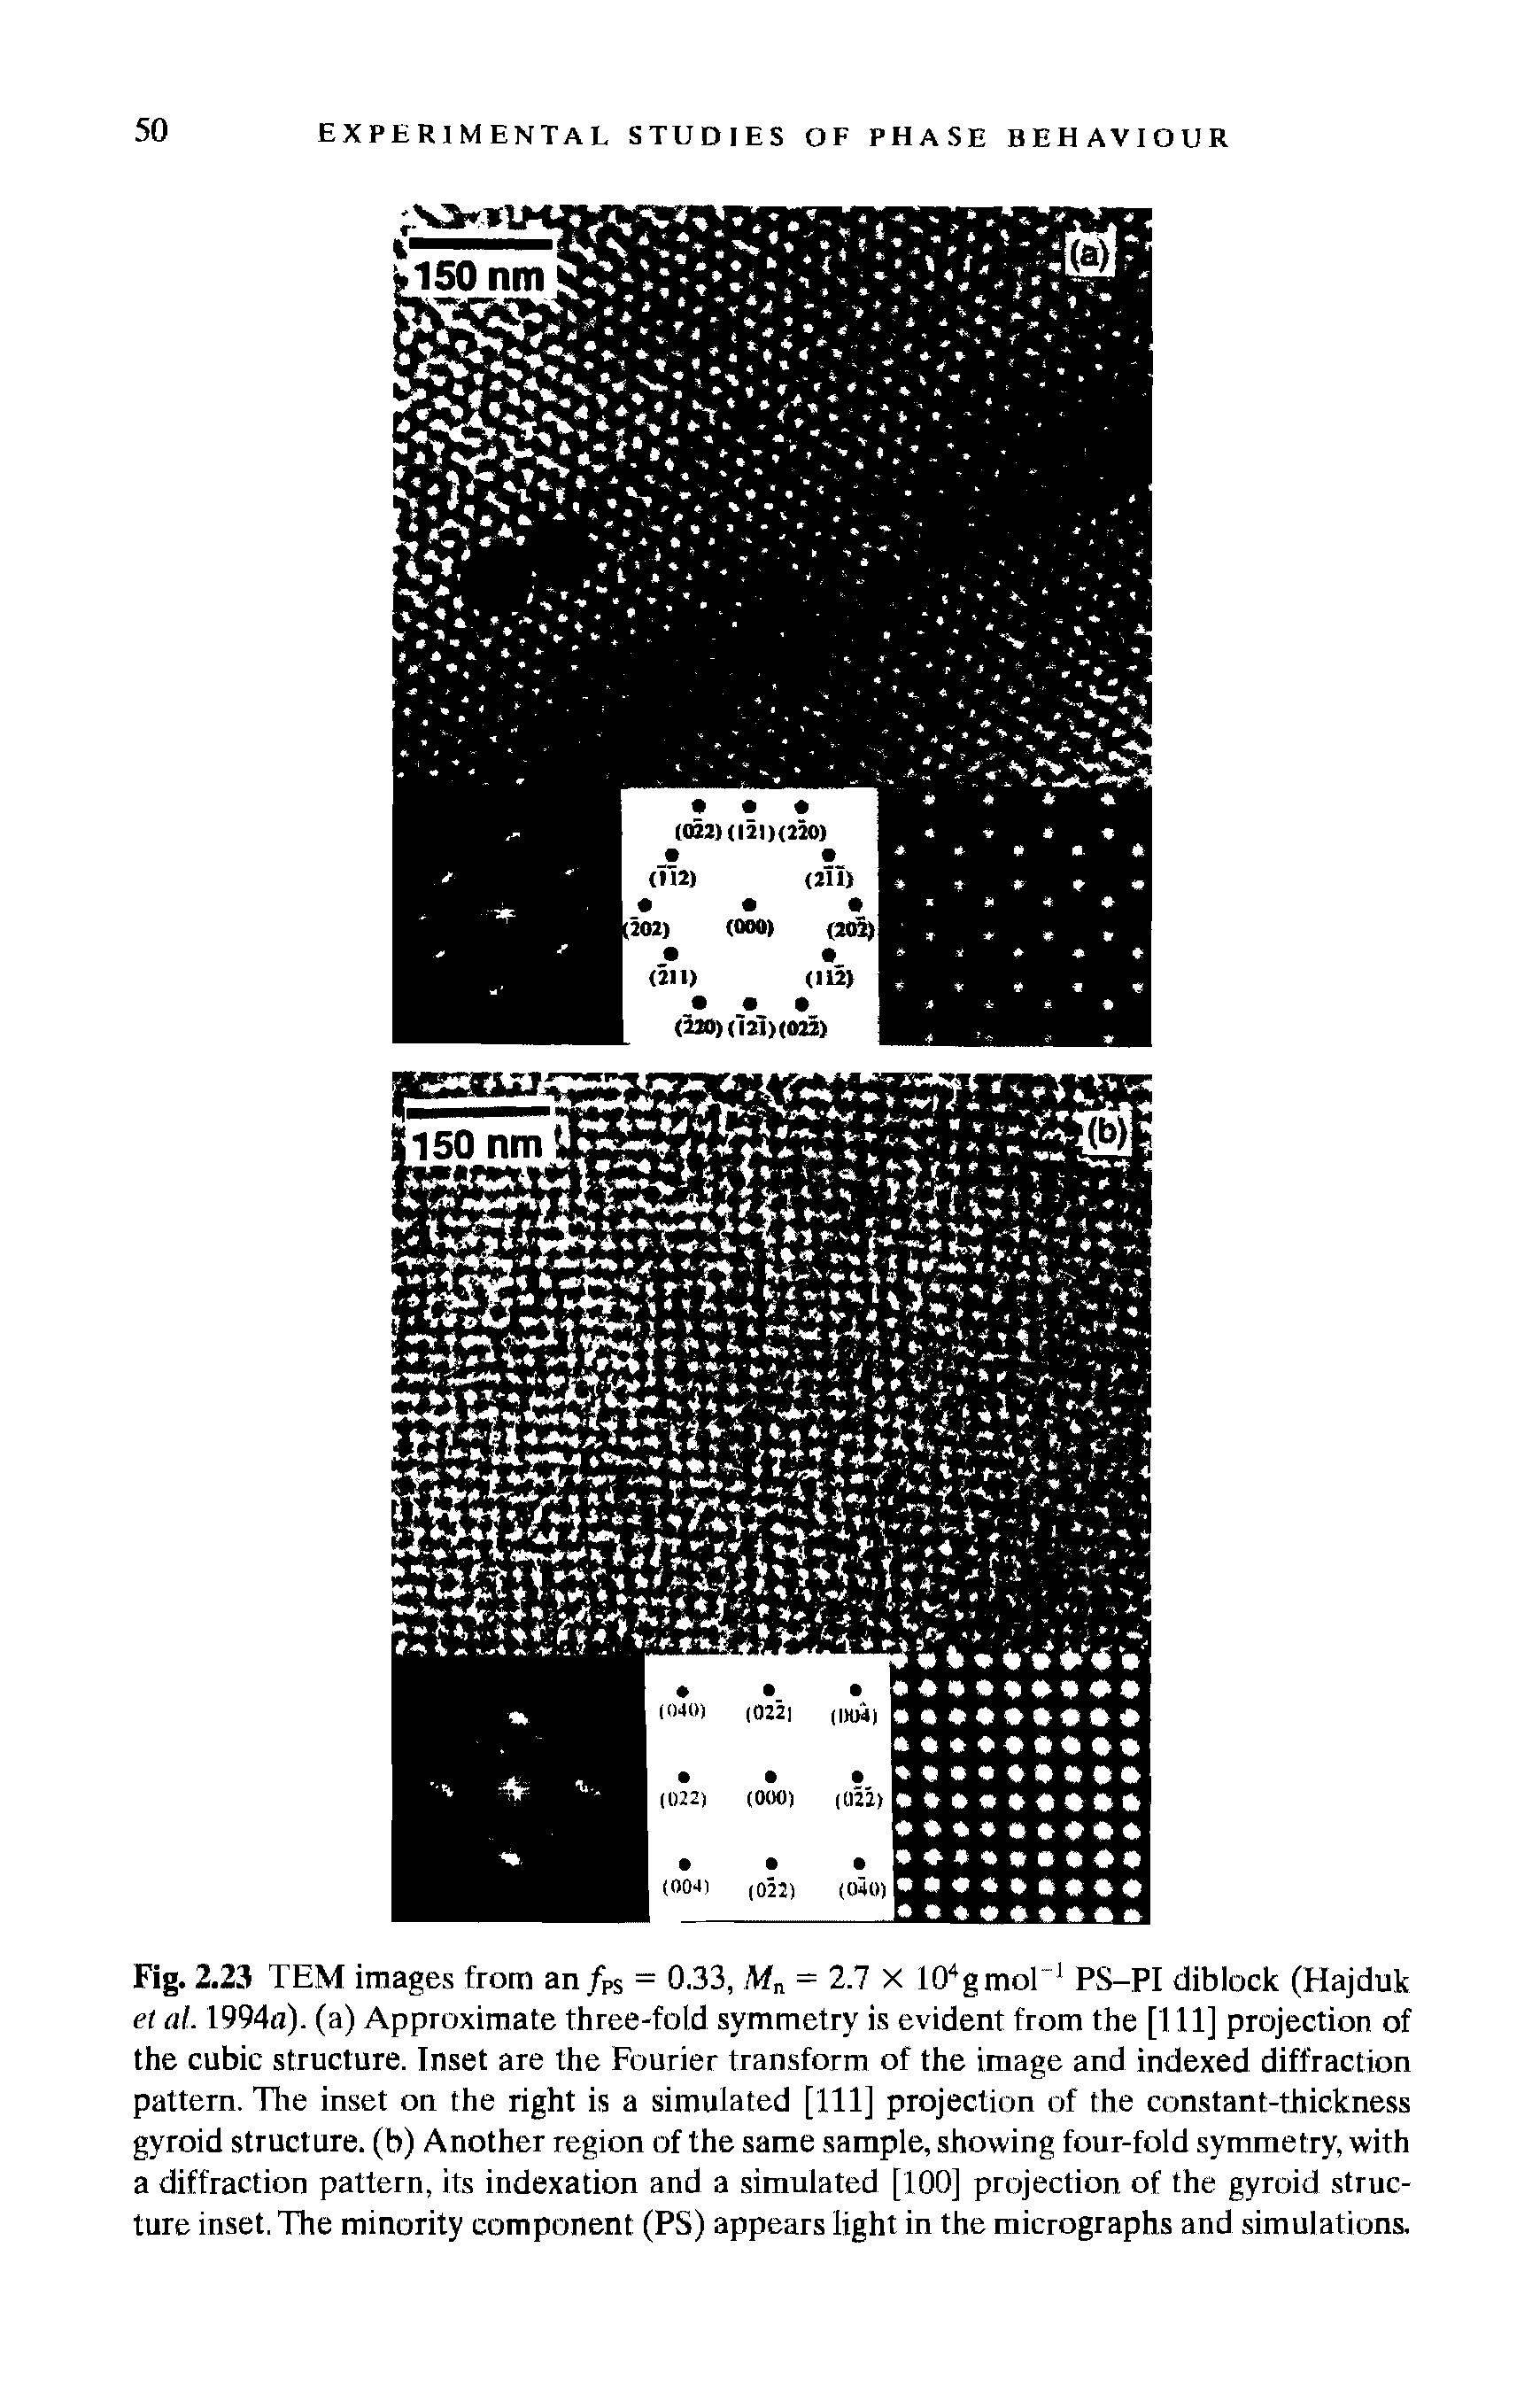 Fig. 2.23 TEM images from an/PS = 0.33, Mn = 2.7 X 104gmor1 PS-PI diblock (Hajduk el al. 1994a). (a) Approximate three-fold symmetry is evident from the [1 11] projection of the cubic structure. Inset are the Fourier transform of the image and indexed diffraction pattern. Tire inset on the right is a simulated [111] projection of the constant-thickness gyroid struct ure, (b) Another region of the same sample, showing four-fold symmetry, with a diffraction pattern, its indexation and a simulated [100] projection of the gyroid structure inset. The minority component (PS) appears light in the micrographs and simulations.